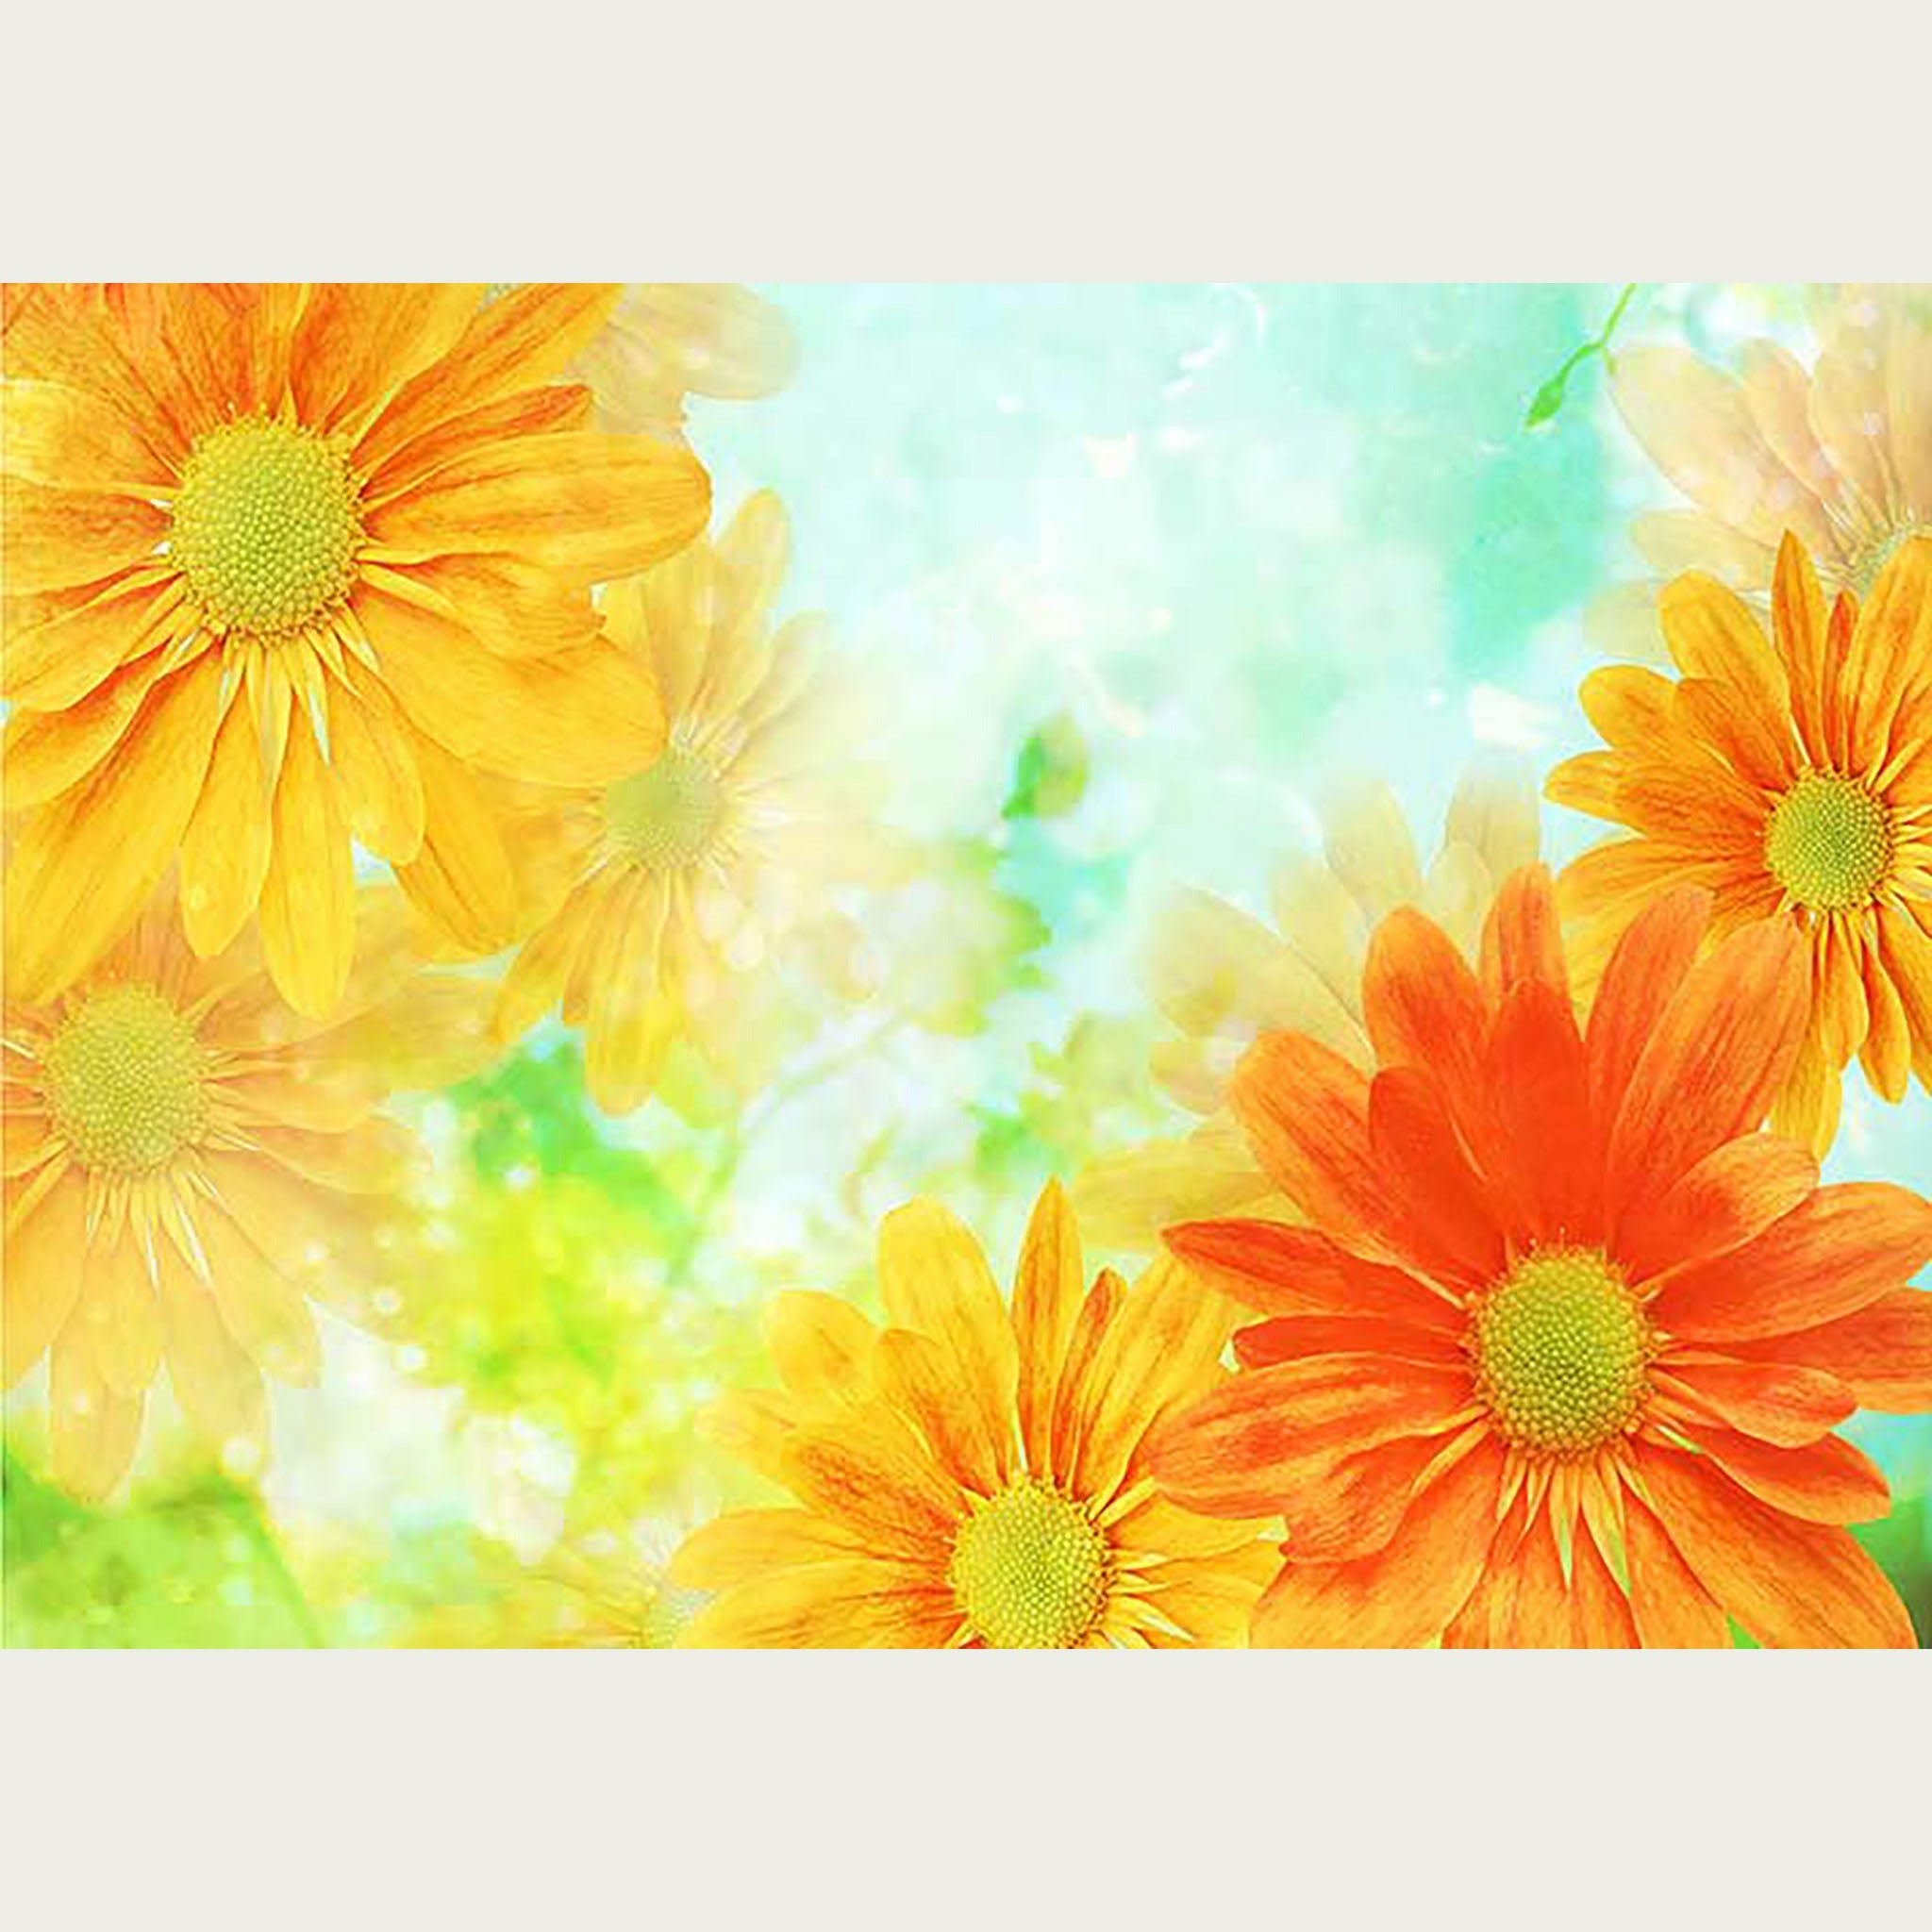 Colorful Orange Sunny Floral rice paper design. White borders on the top and bottom.